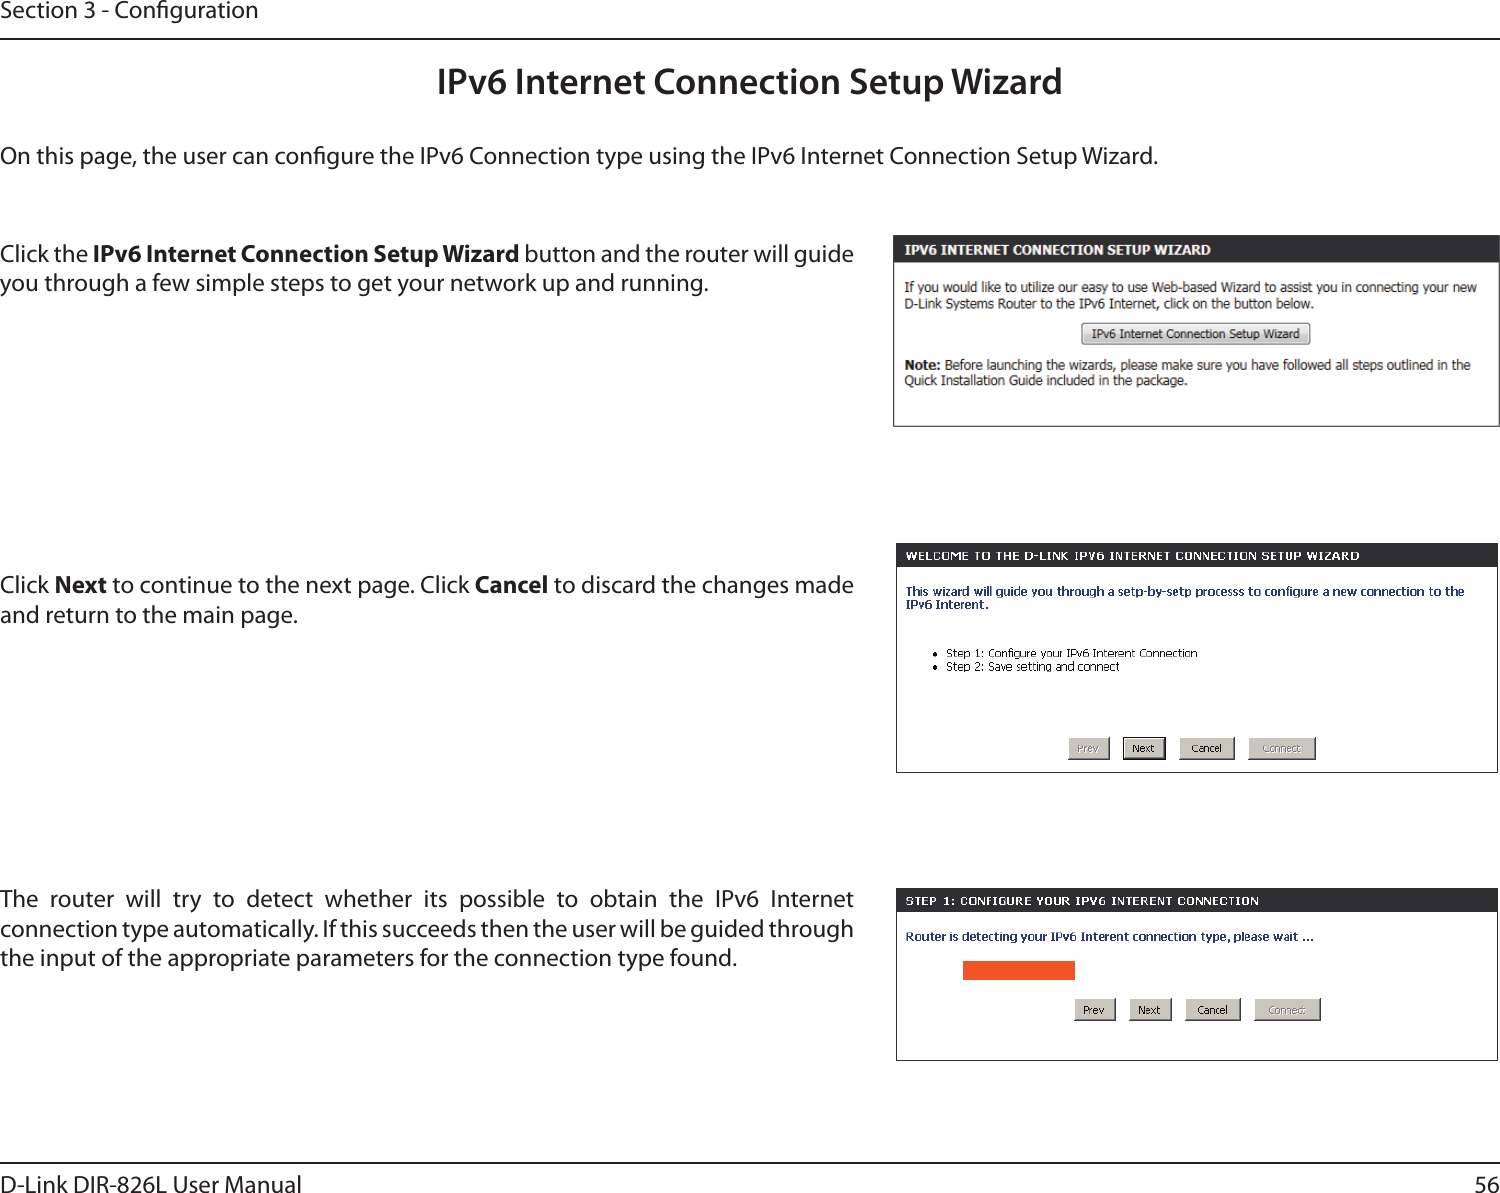 56D-Link DIR-826L User ManualSection 3 - CongurationIPv6 Internet Connection Setup WizardOn this page, the user can congure the IPv6 Connection type using the IPv6 Internet Connection Setup Wizard.Click the IPv6 Internet Connection Setup Wizard button and the router will guide you through a few simple steps to get your network up and running.Click Next to continue to the next page. Click Cancel to discard the changes made and return to the main page.The  router  will  try  to  detect  whether  its  possible  to  obtain  the  IPv6  Internet connection type automatically. If this succeeds then the user will be guided through the input of the appropriate parameters for the connection type found.